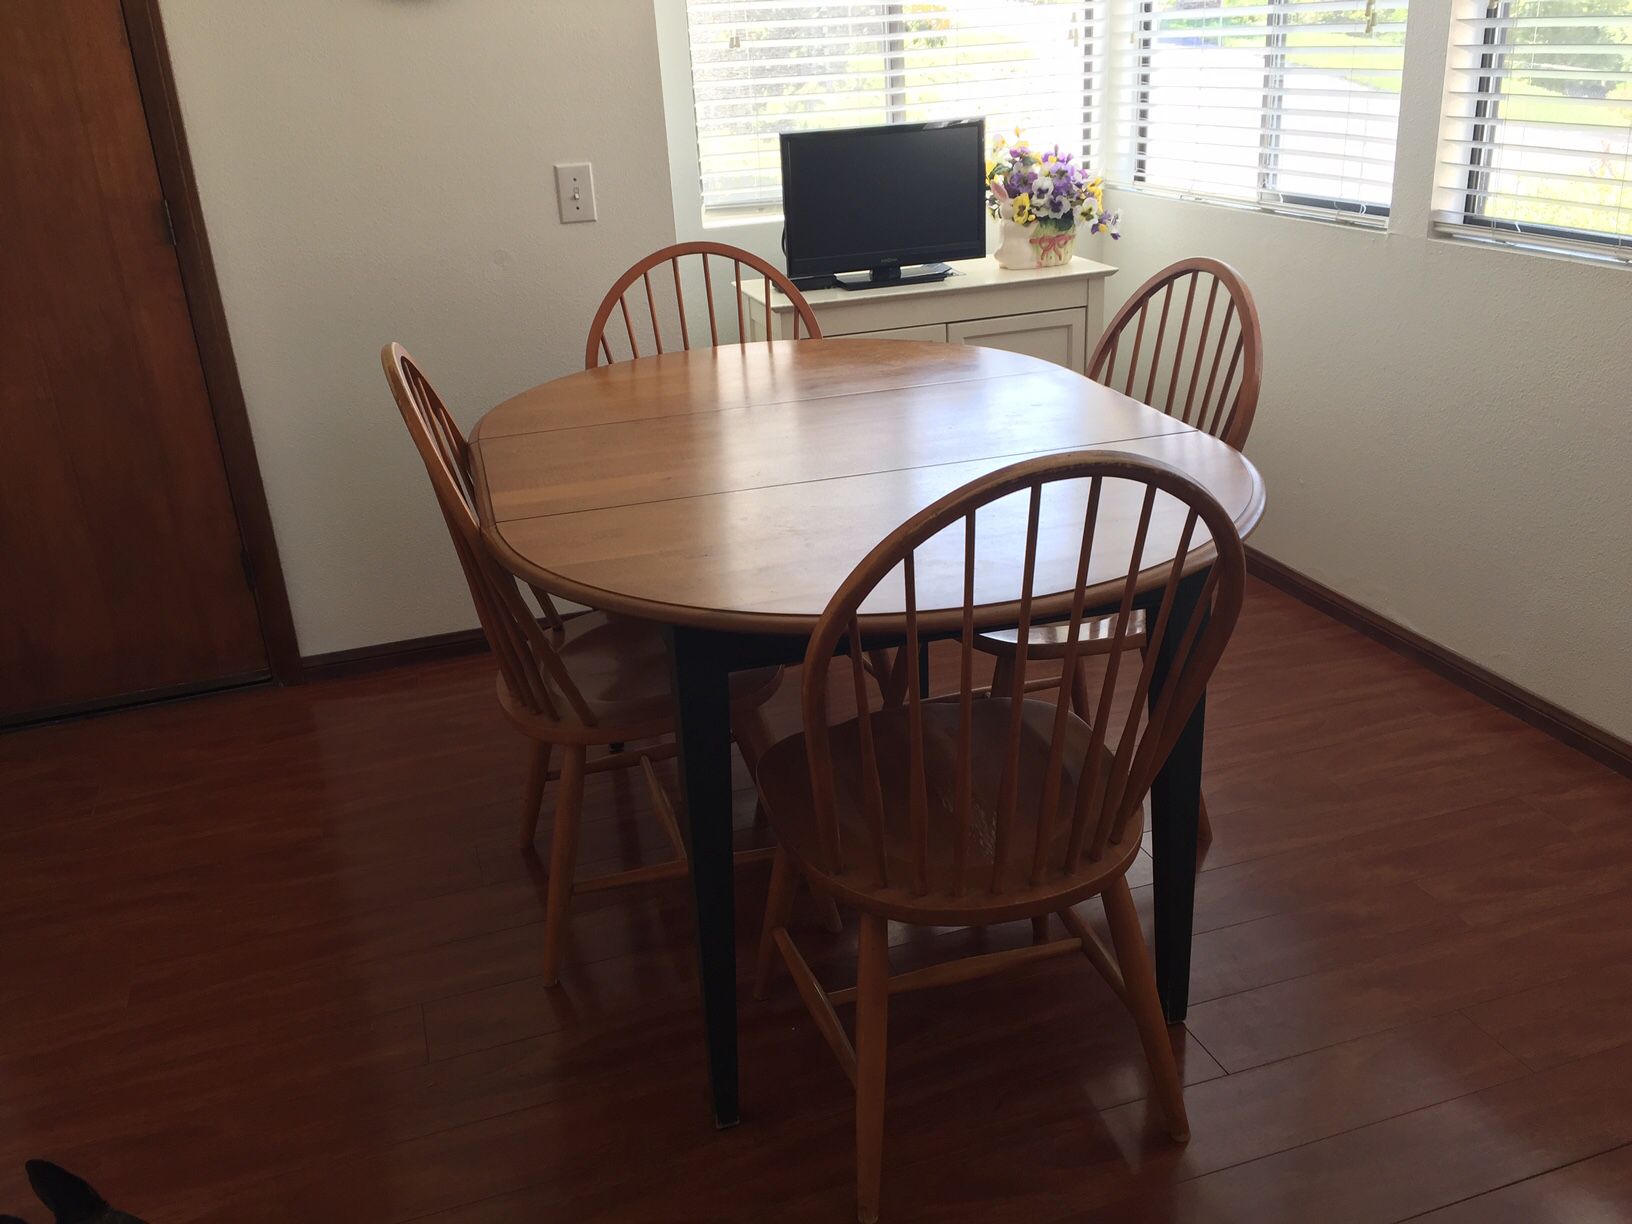 Wood kitchen table with chairs